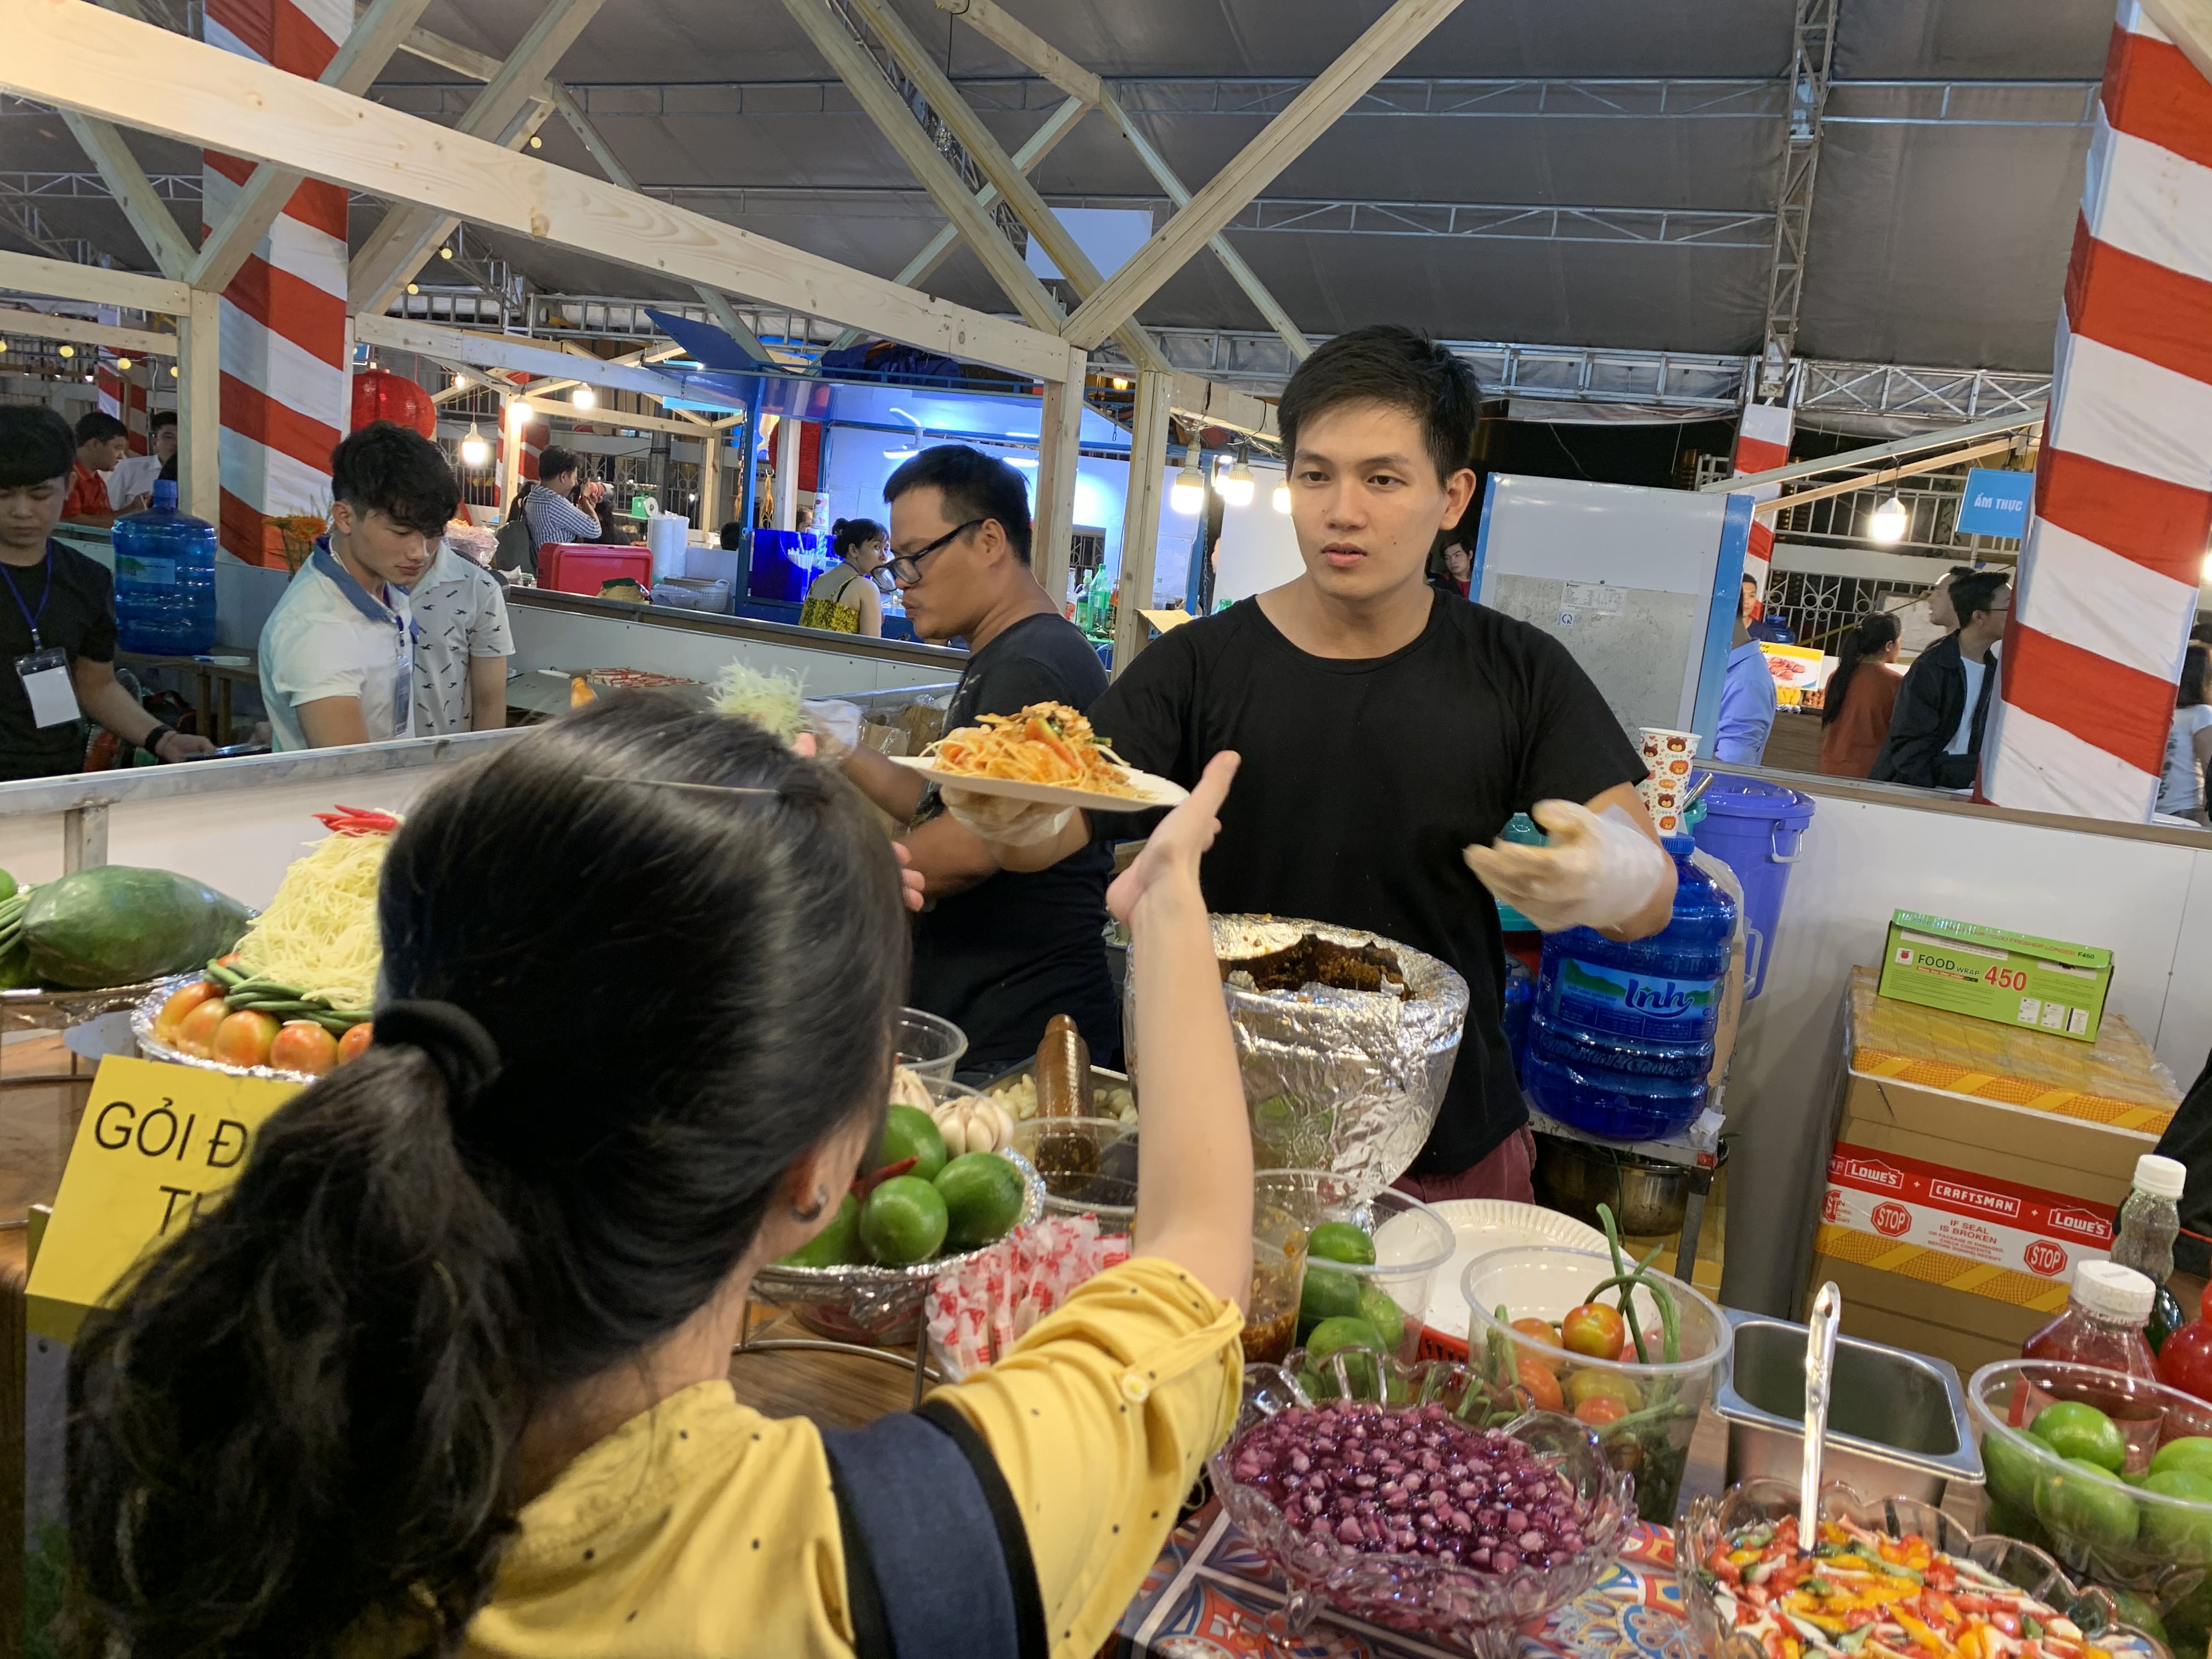 A vendor sells food from a stall at the international food festival held at the Youth Cultural House in District 1, Ho Chi Minh City, November 14, 2019. Photo: Bao Anh / Tuoi Tre News